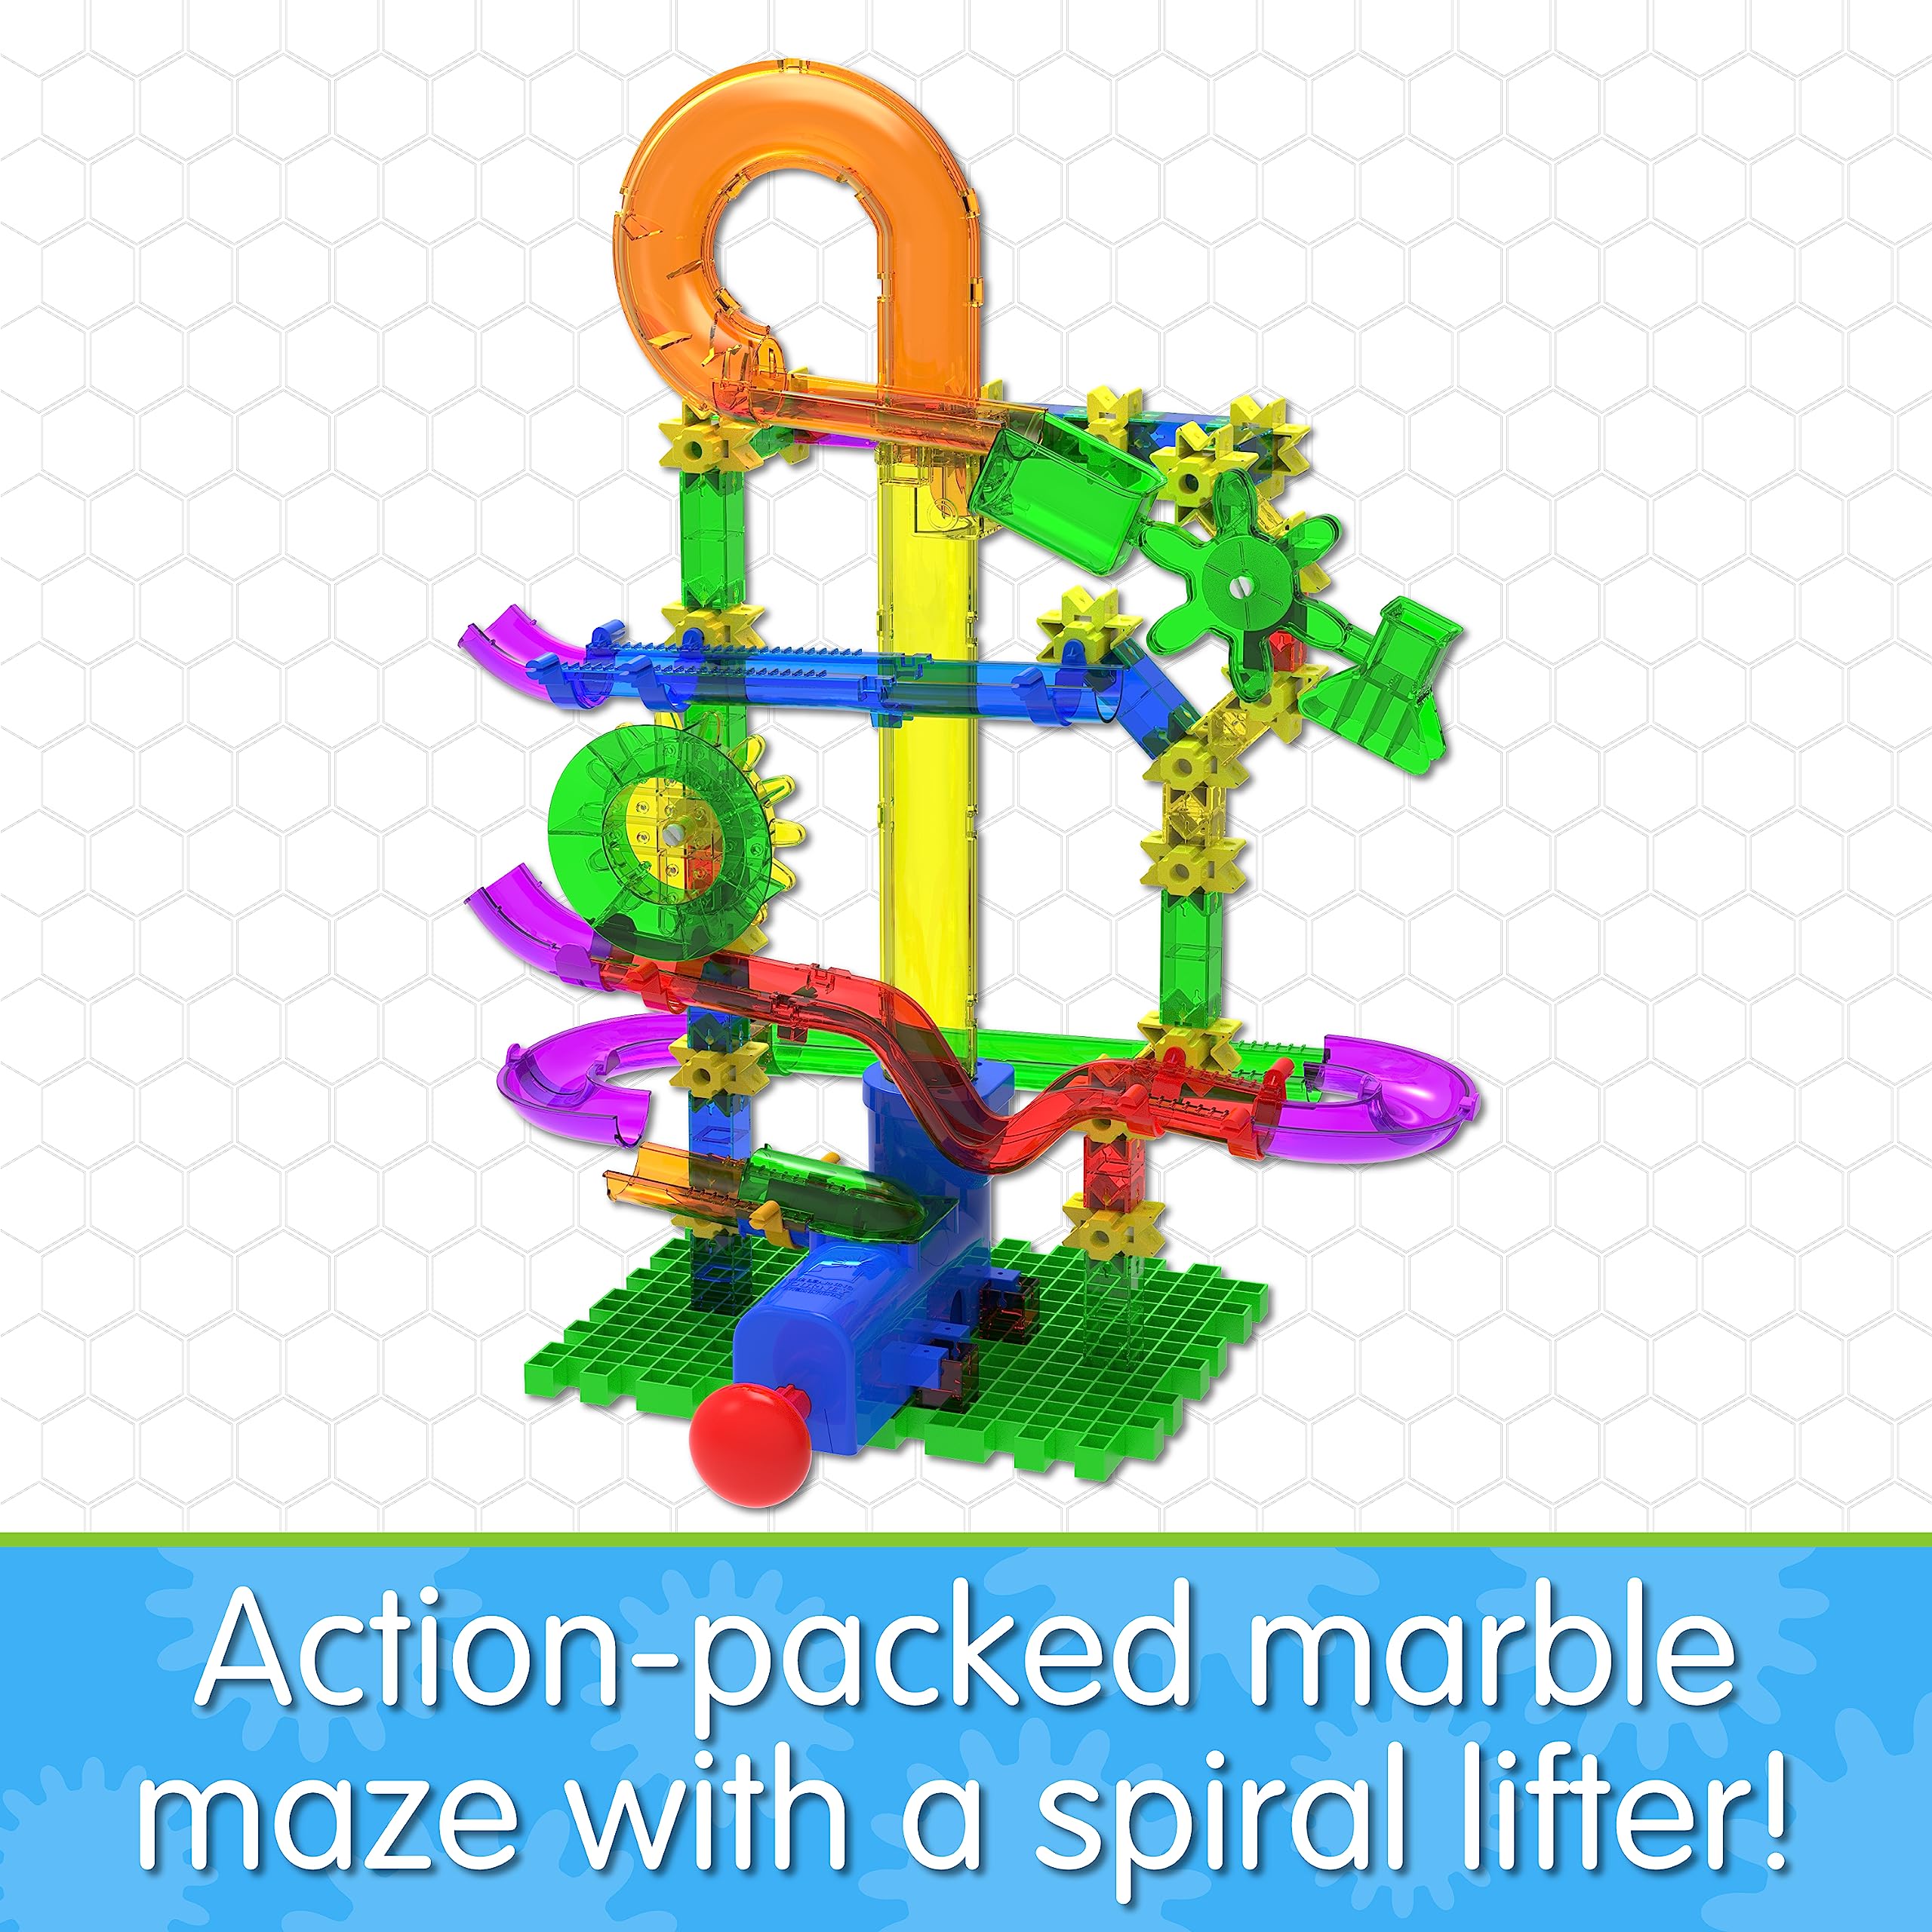 The Learning Journey: Techno Gears Marble Mania STEM – Xpress Marble Run (80+ pieces) Construction Set – Toy Marble Maze Game - Award Winning Learning Toys & Gifts for Boys & Girls Ages 6 Years and Up